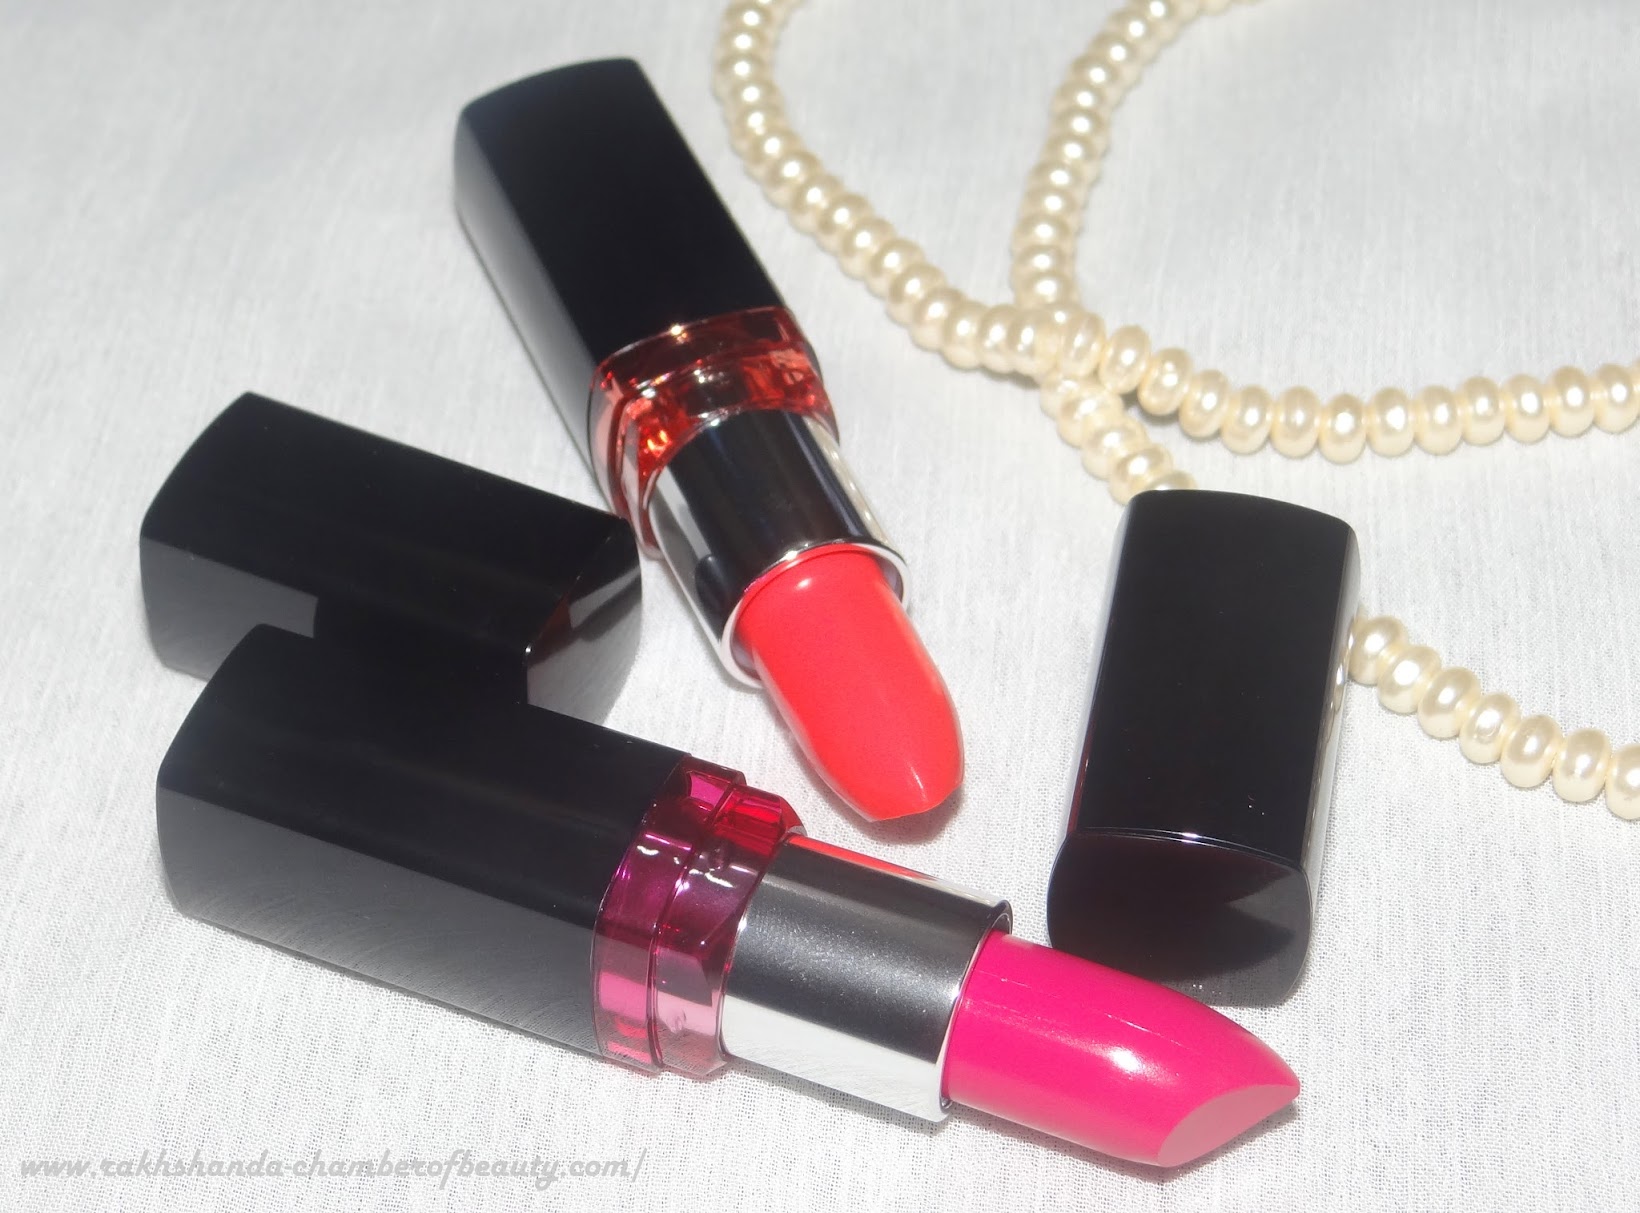 Maybelline NY Color Show Lipsticks- Review, swatches & price in India, Intense Fashionable lipcolor, Indian Beauty blogger